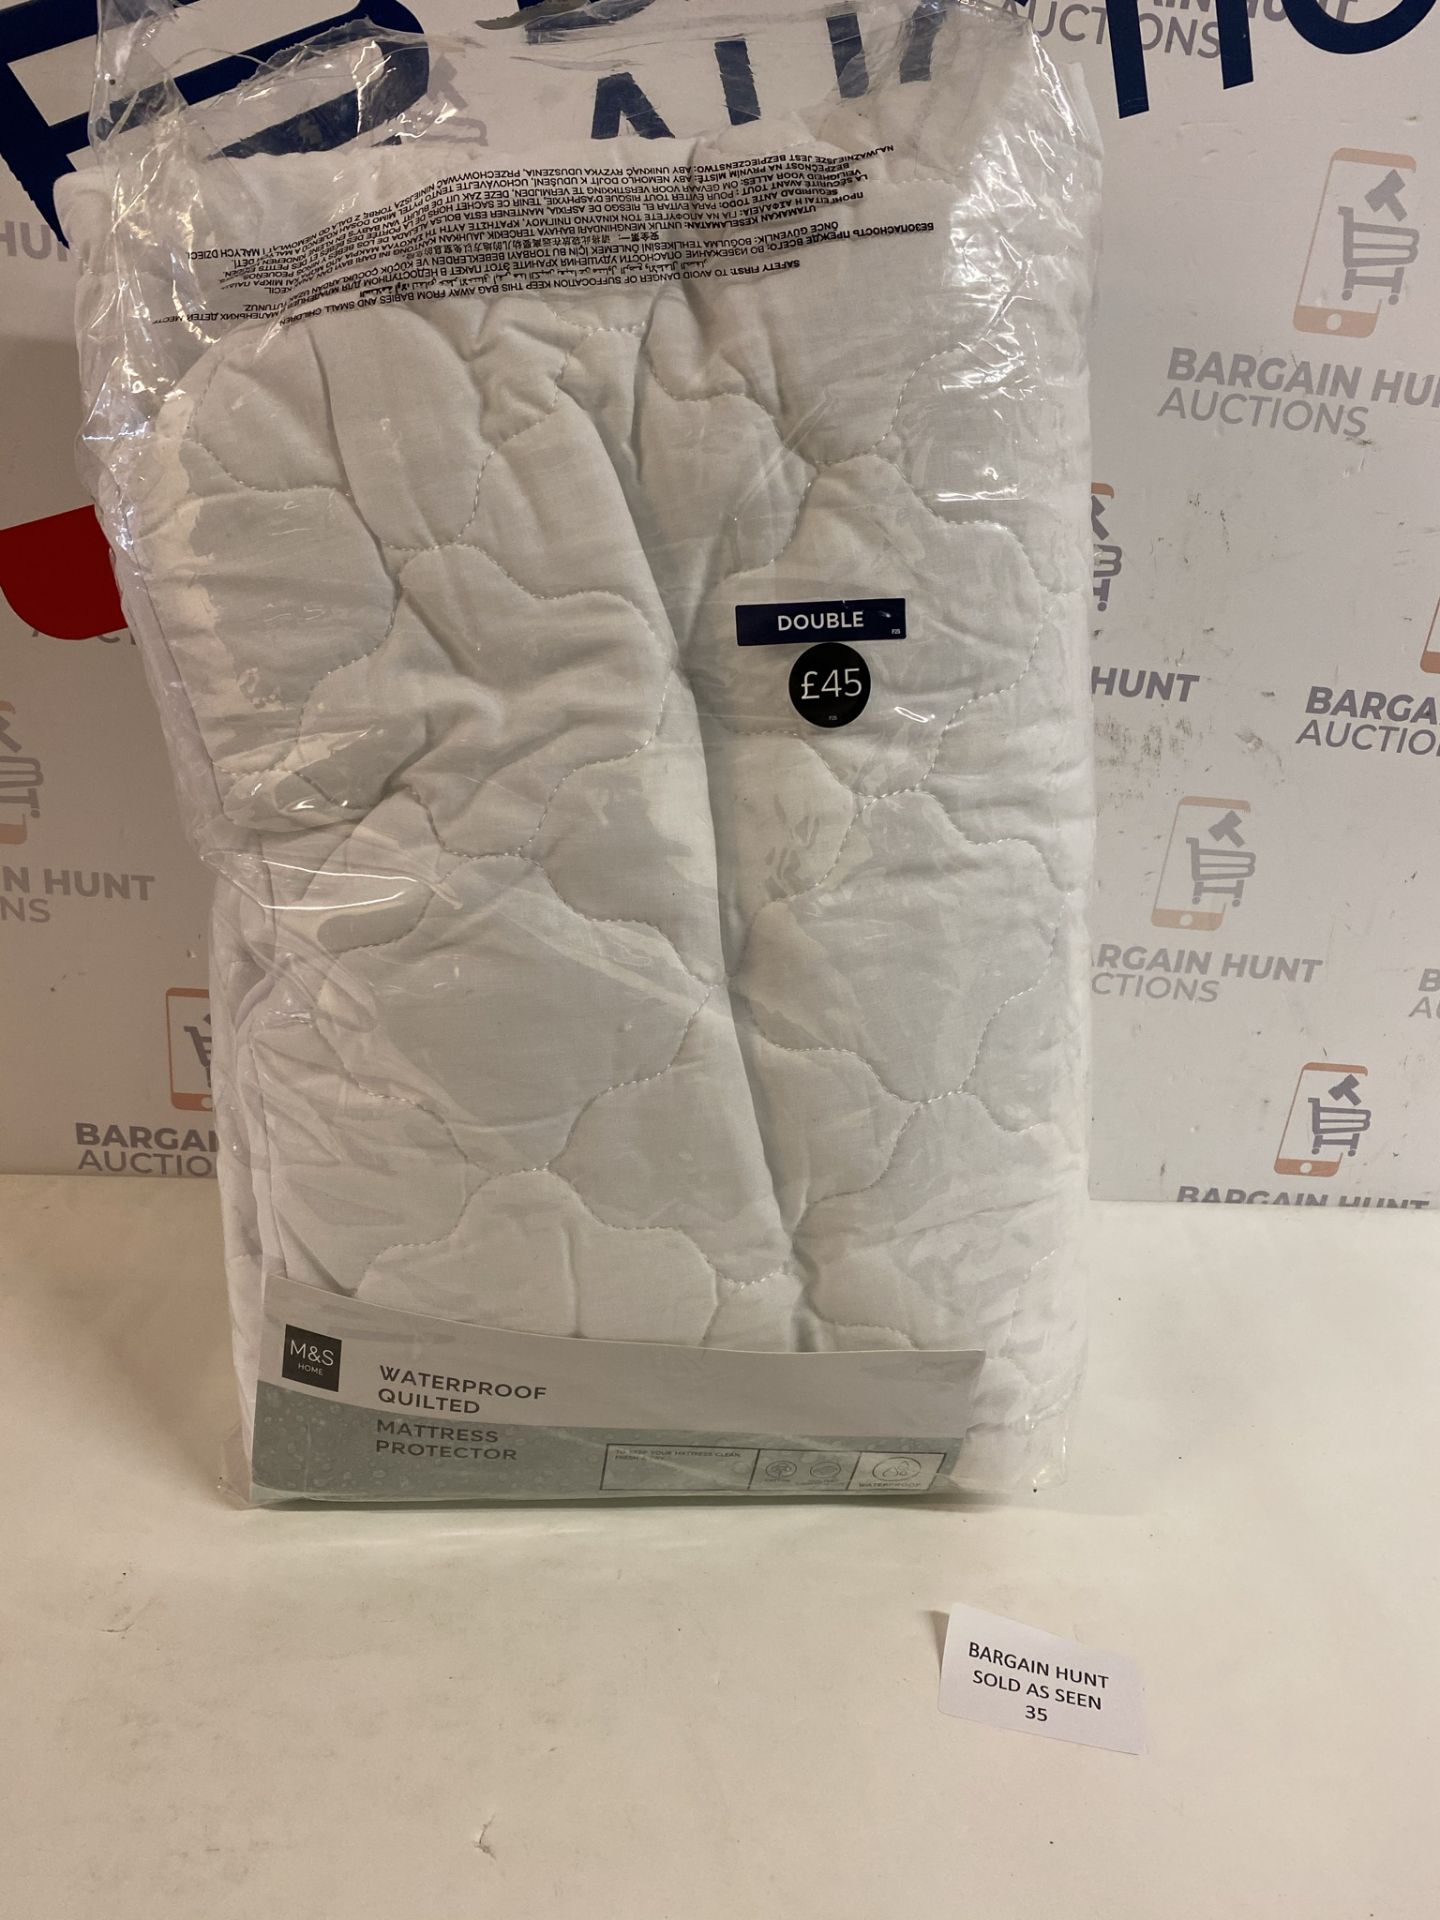 Waterproof Quilted Mattress Protector, Double RRP £45